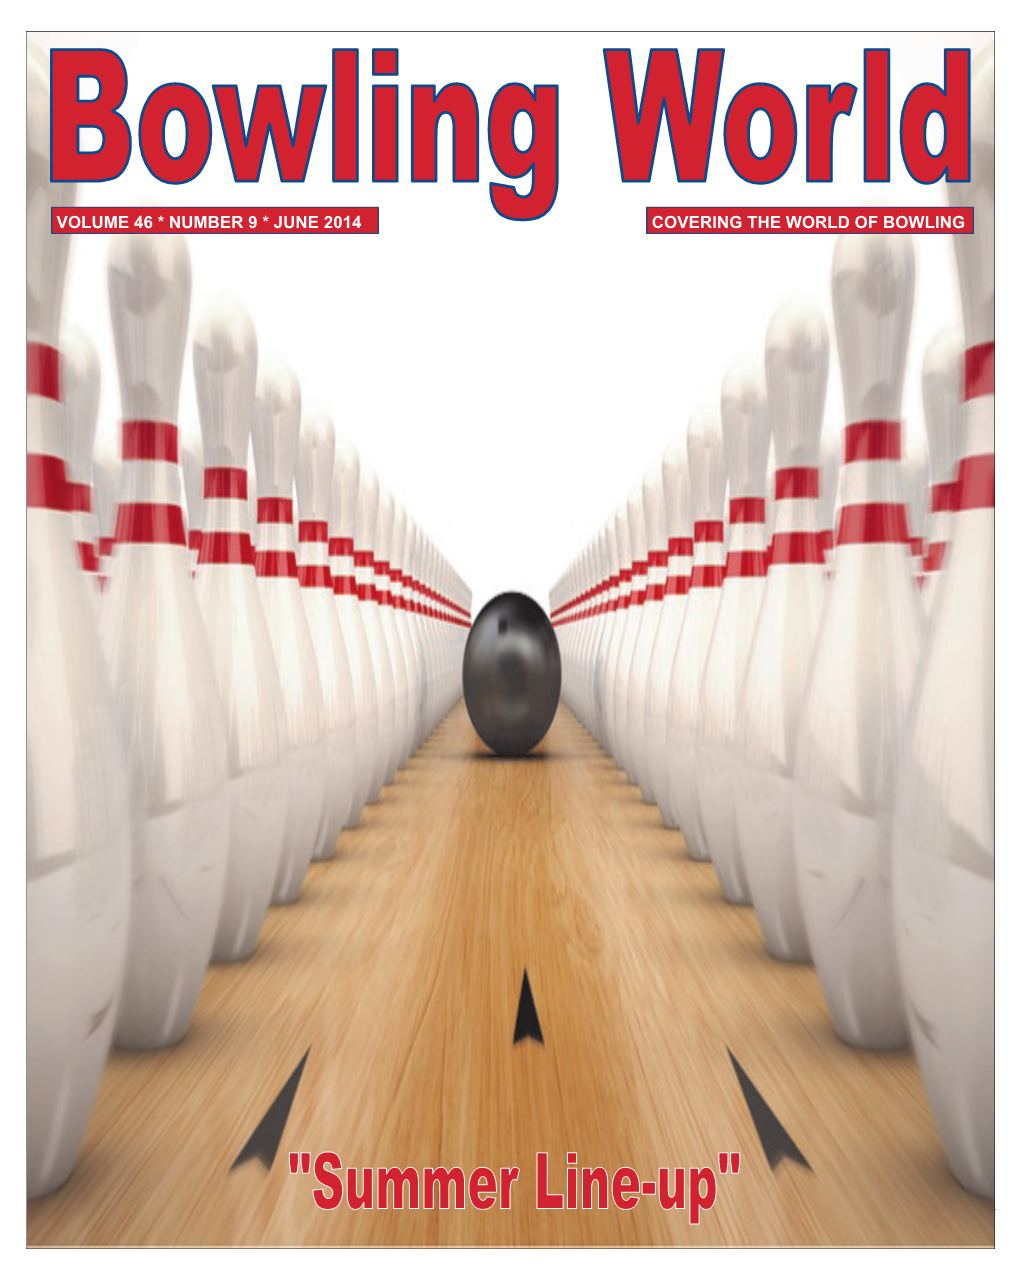 June 2014 Covering the World of Bowling